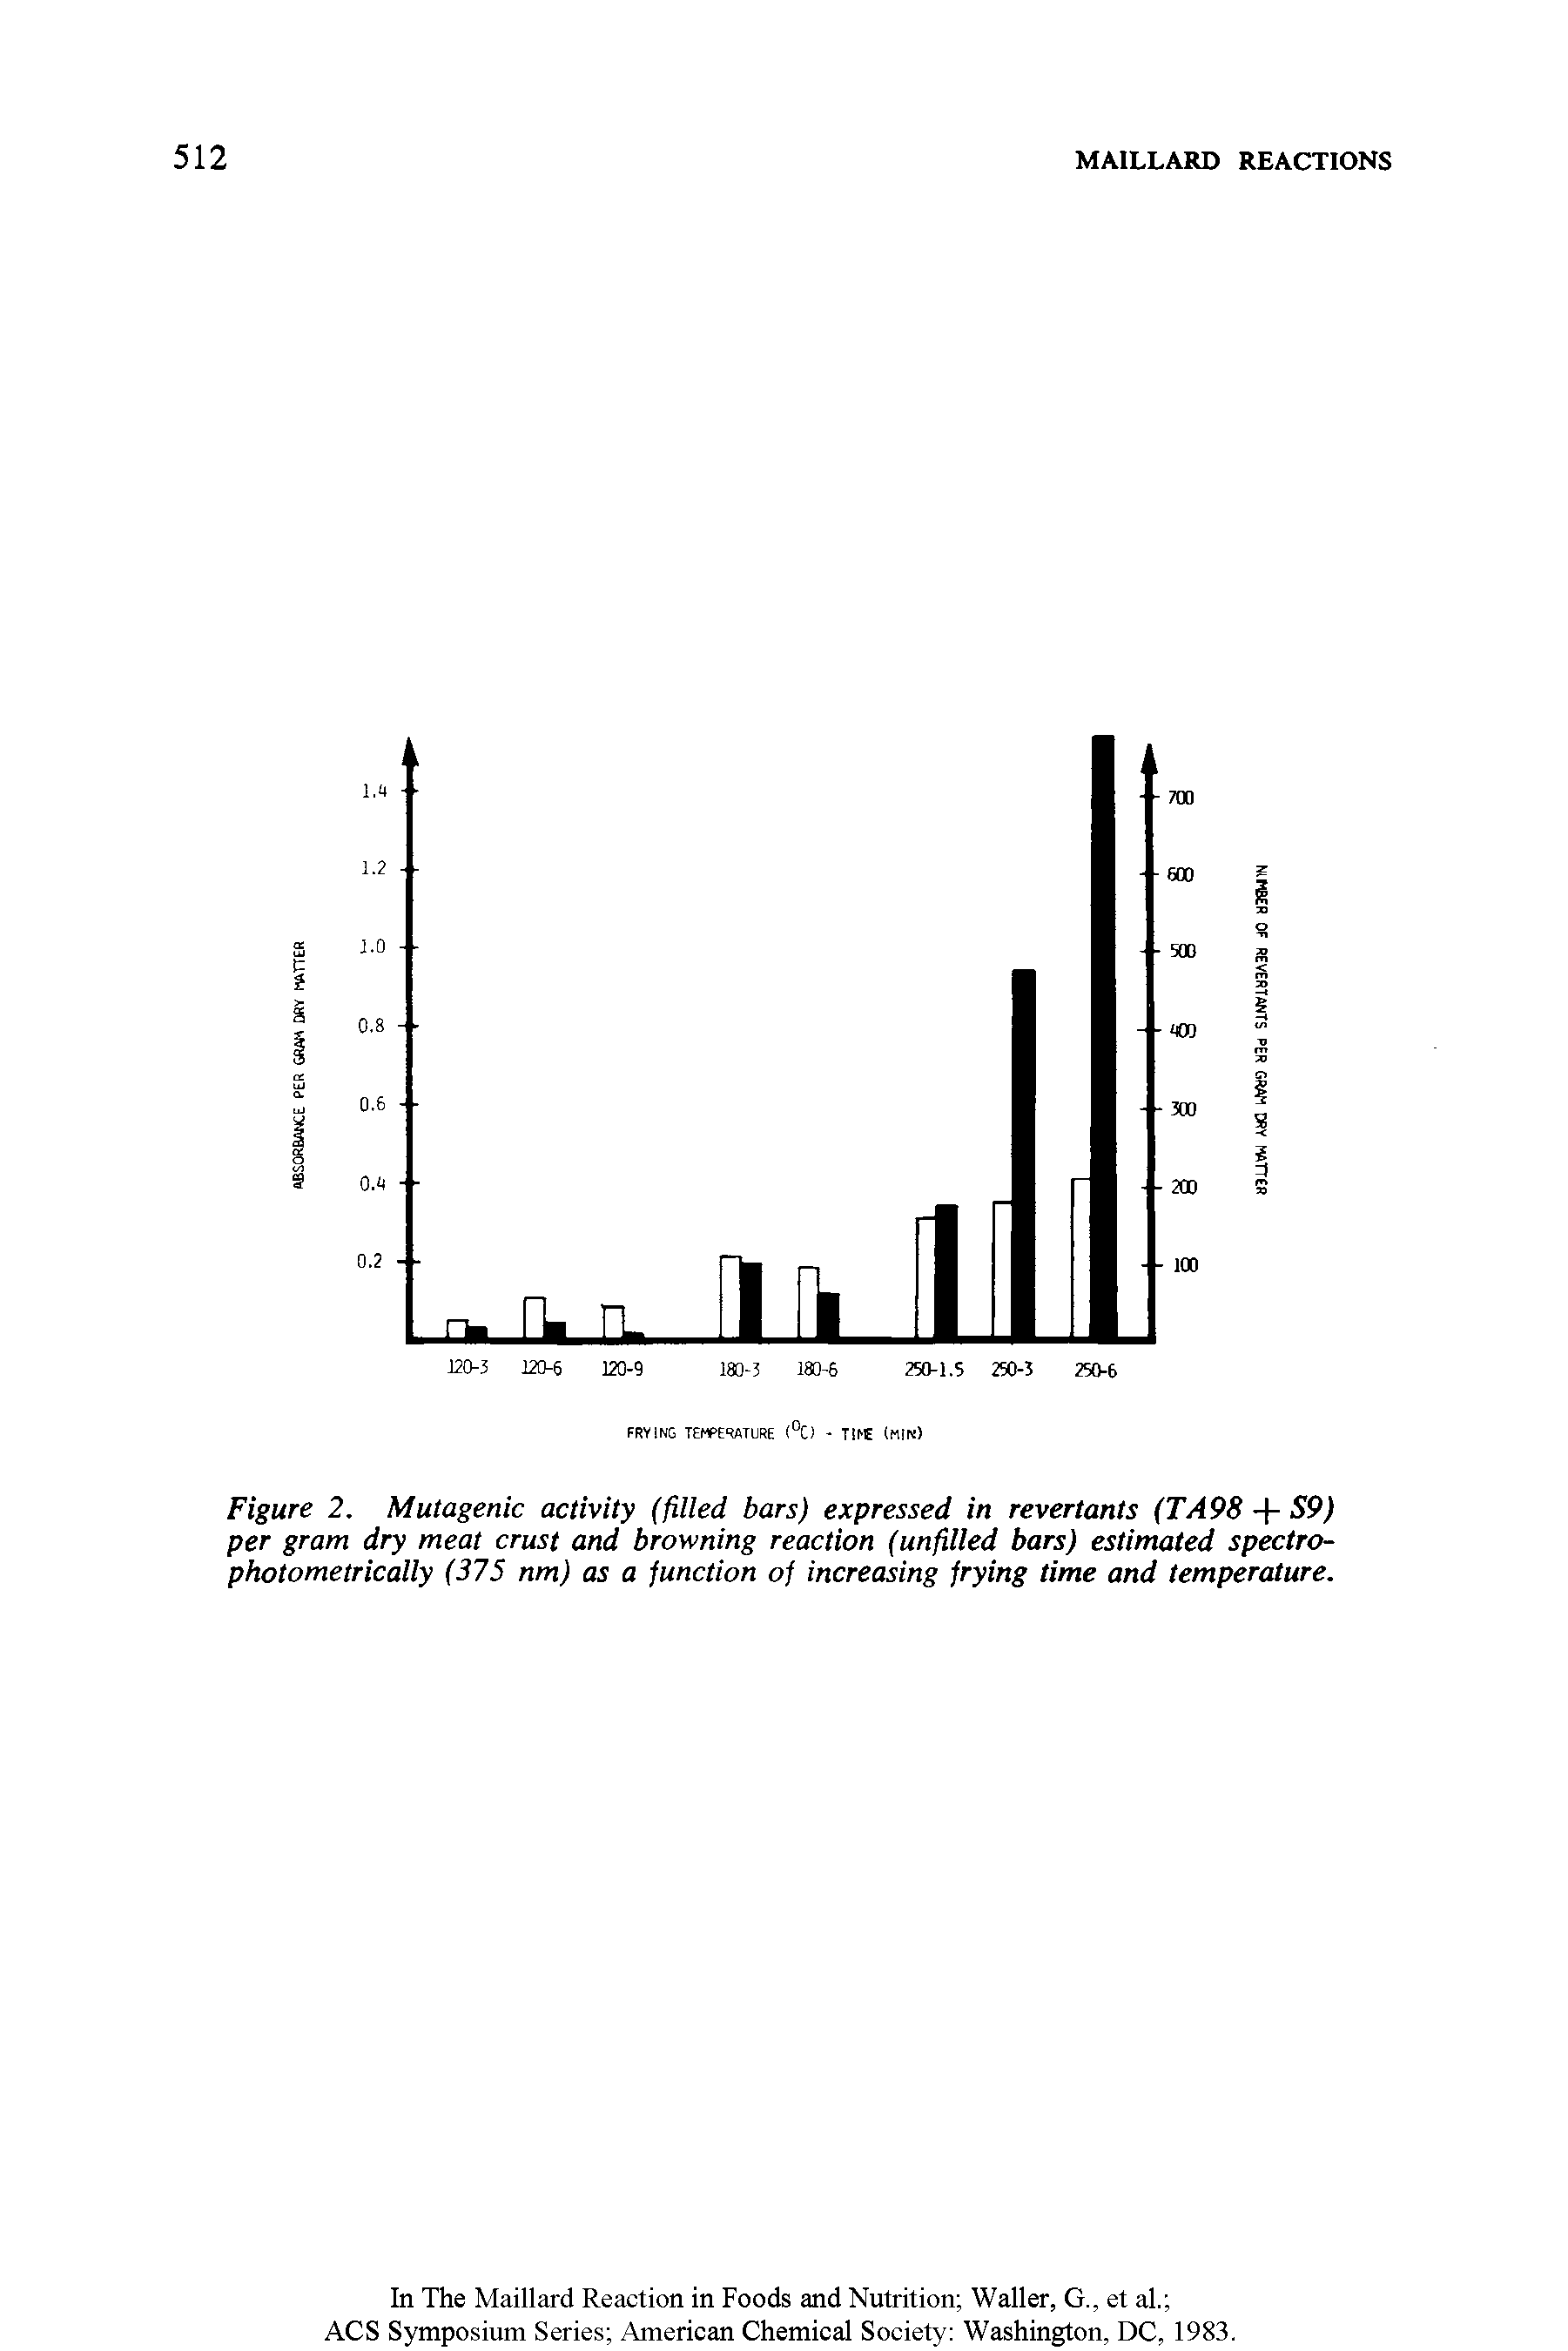 Figure 2. Mutagenic activity (filled bars) expressed in revertants (TA98 + S9) per gram dry meat crust and browning reaction (unfilled bars) estimated spectro-photometrically (375 nm) as a function of increasing frying time and temperature.